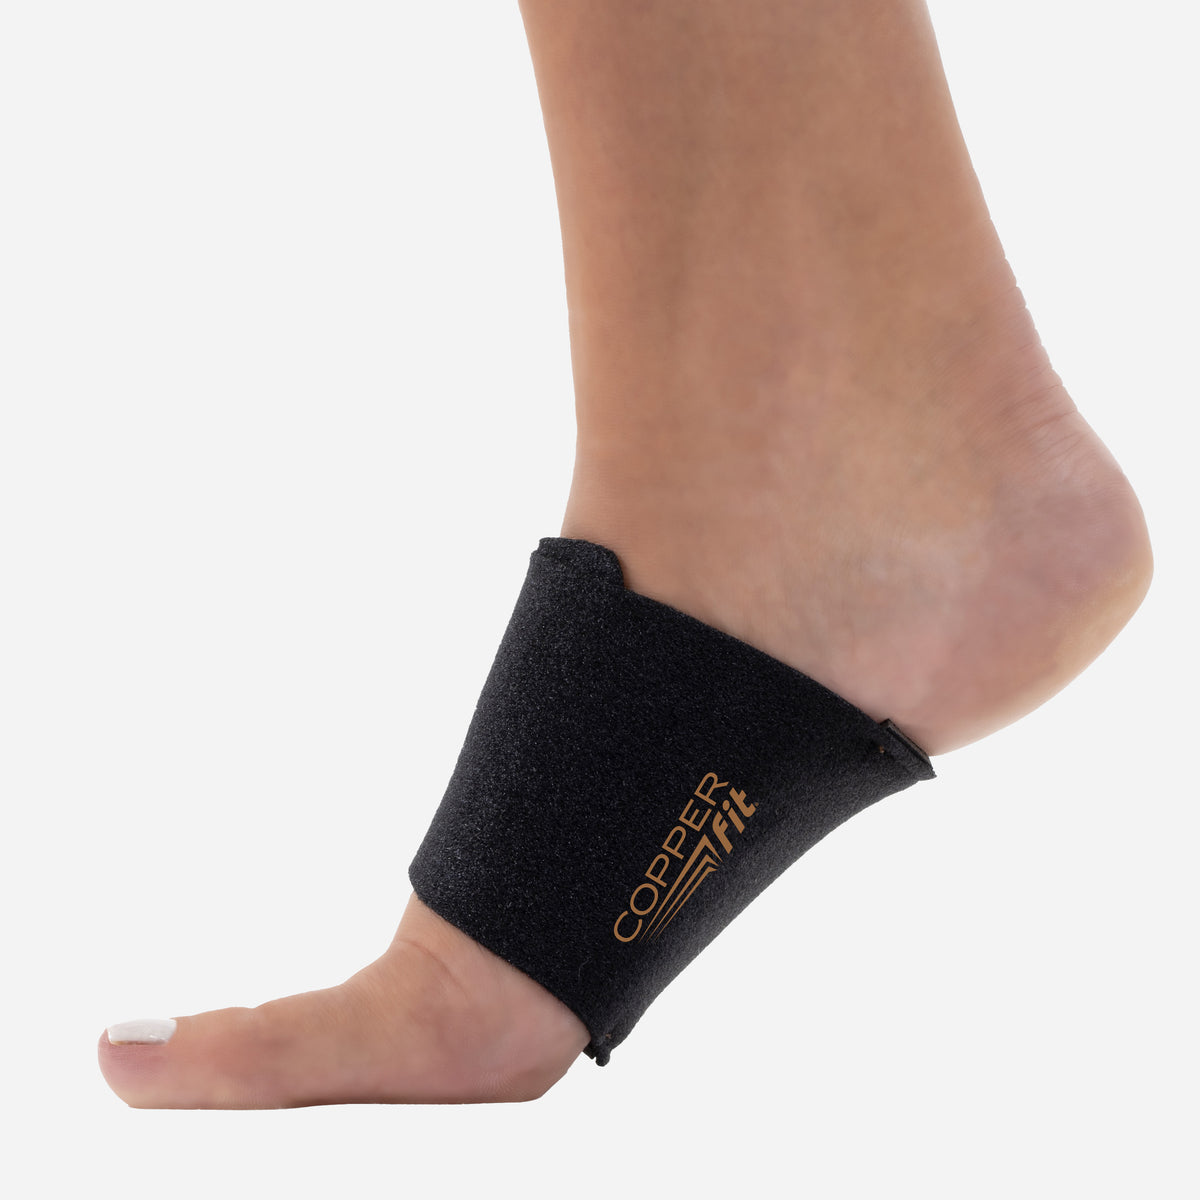 Tommie Copper Sport Compression Ankle Sleeve, Black, Small/Medium, Support  Brace, 1 Count per Pack 